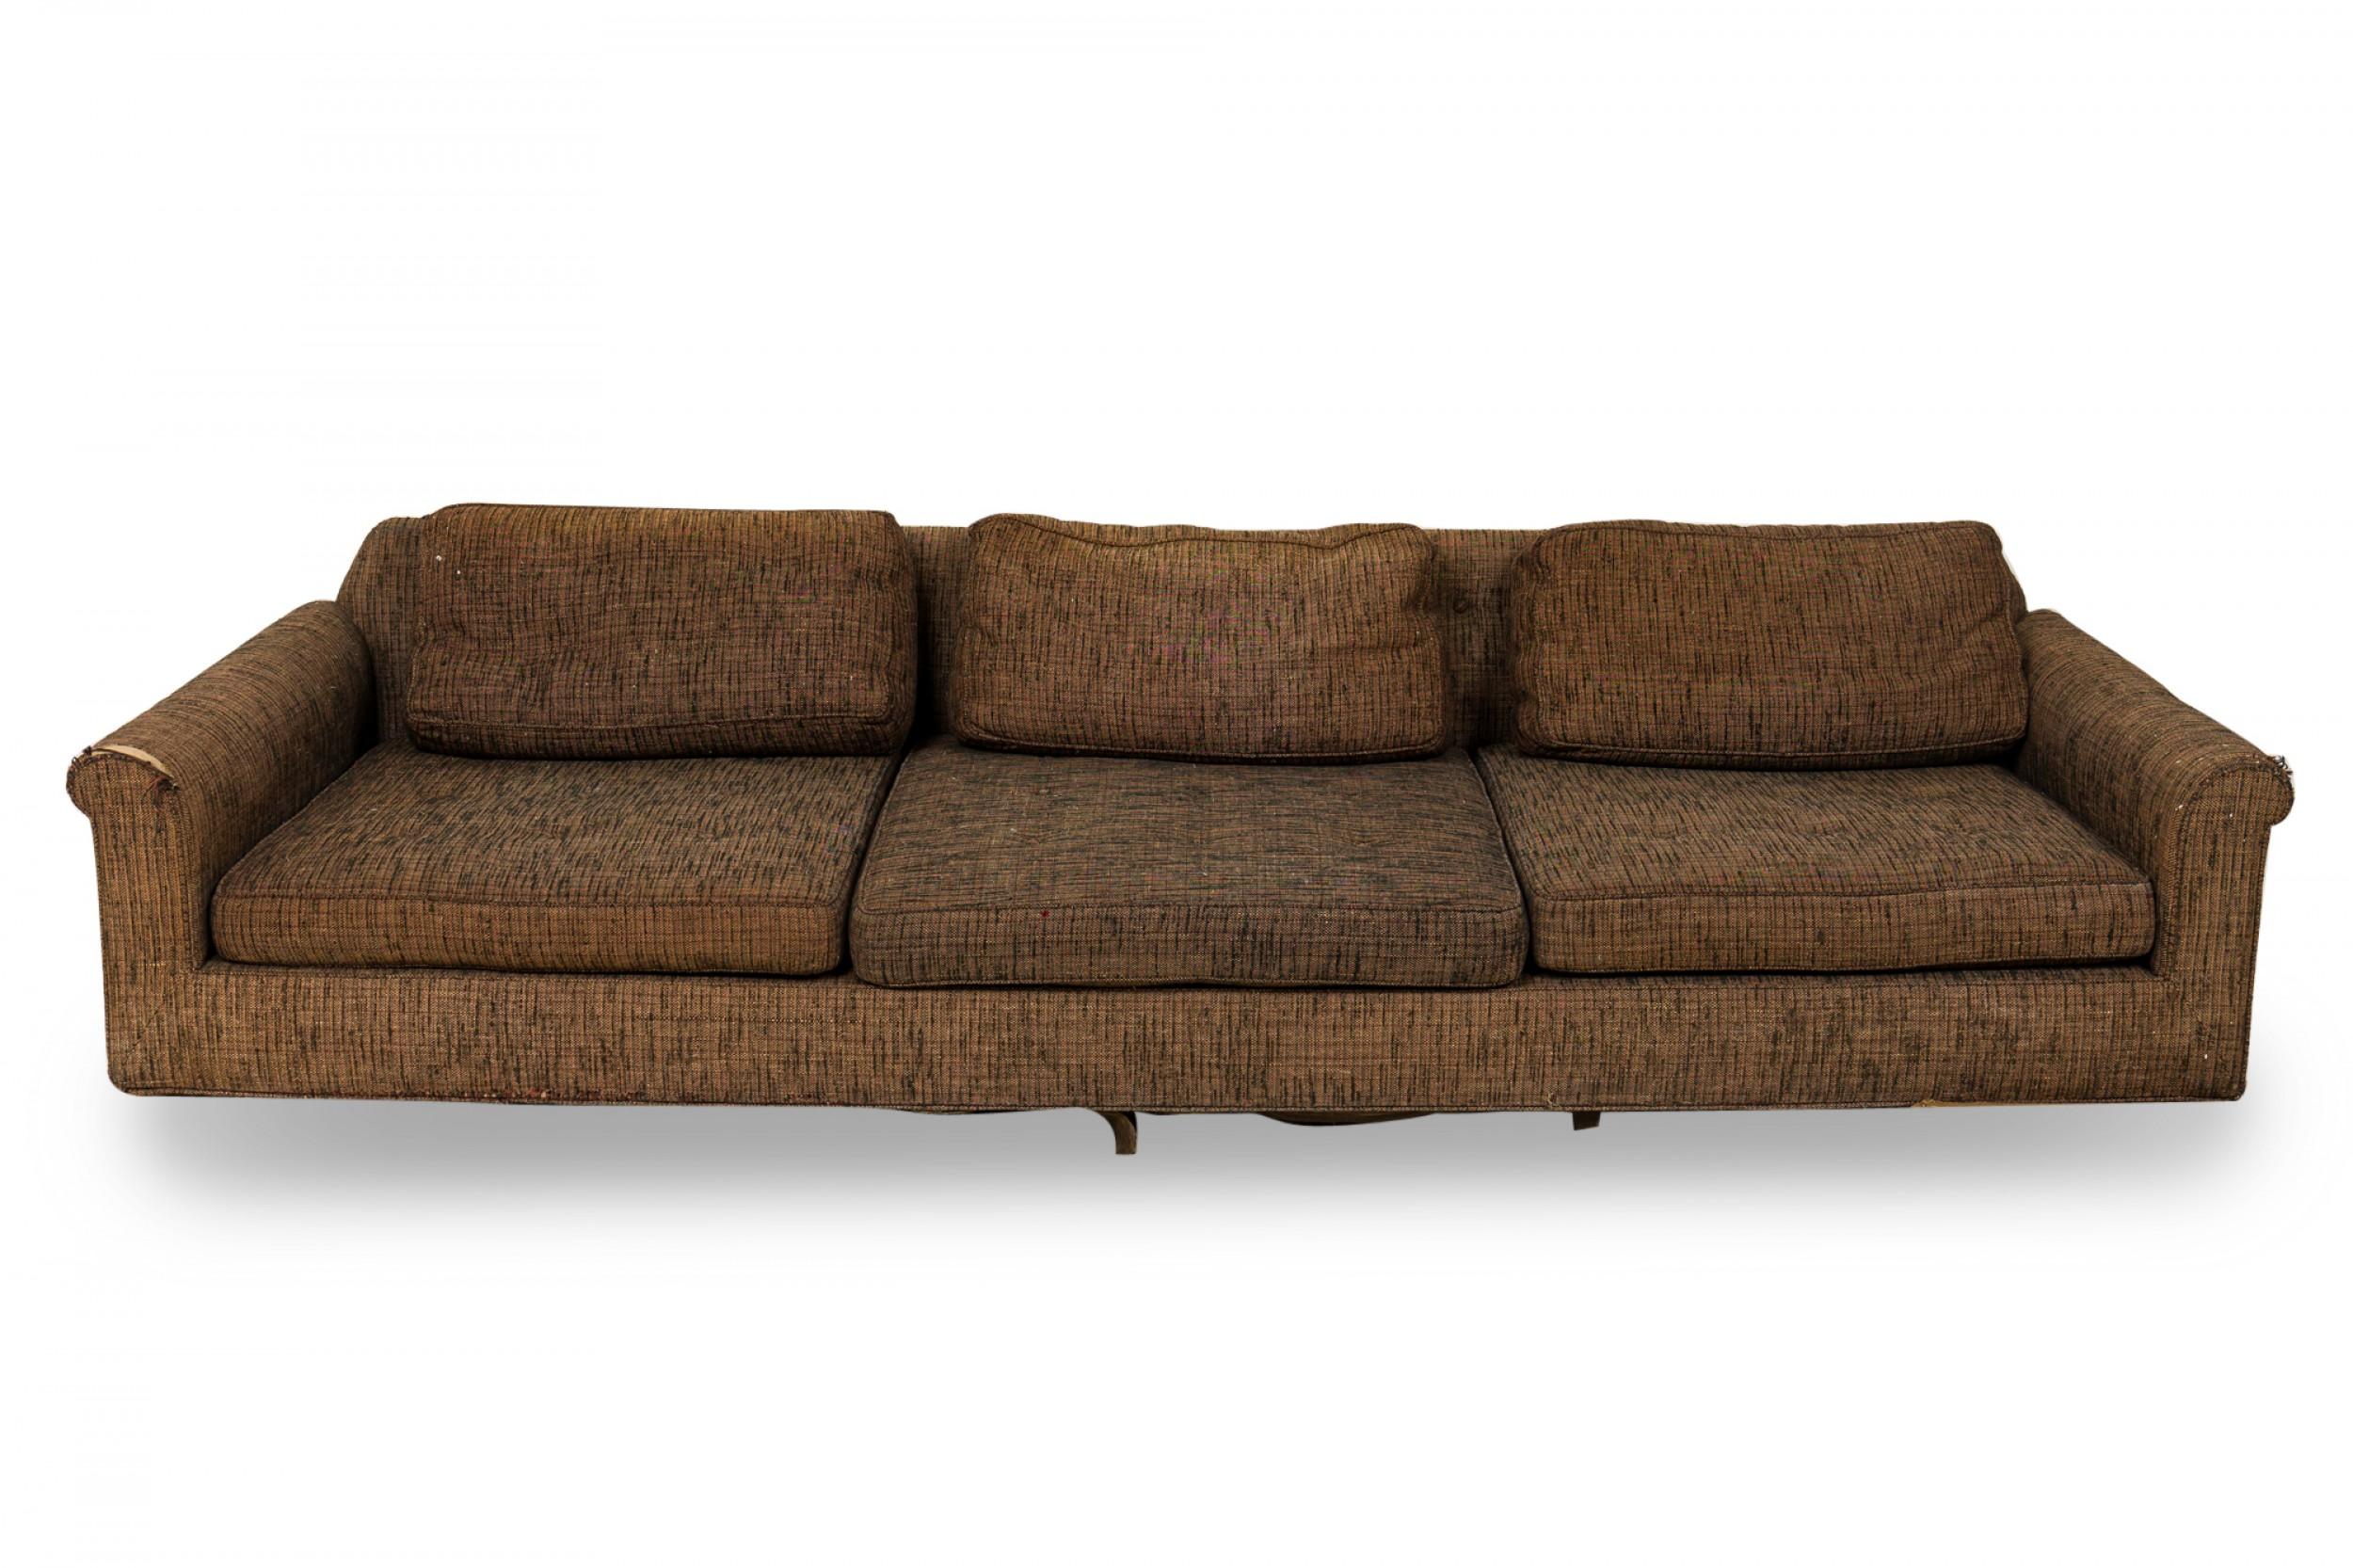 American Mid-Century 'Big Texan' oversized sofa with brown textured fabric upholstery and removable seat and back cushions. (EDWARD WORMLEY)
